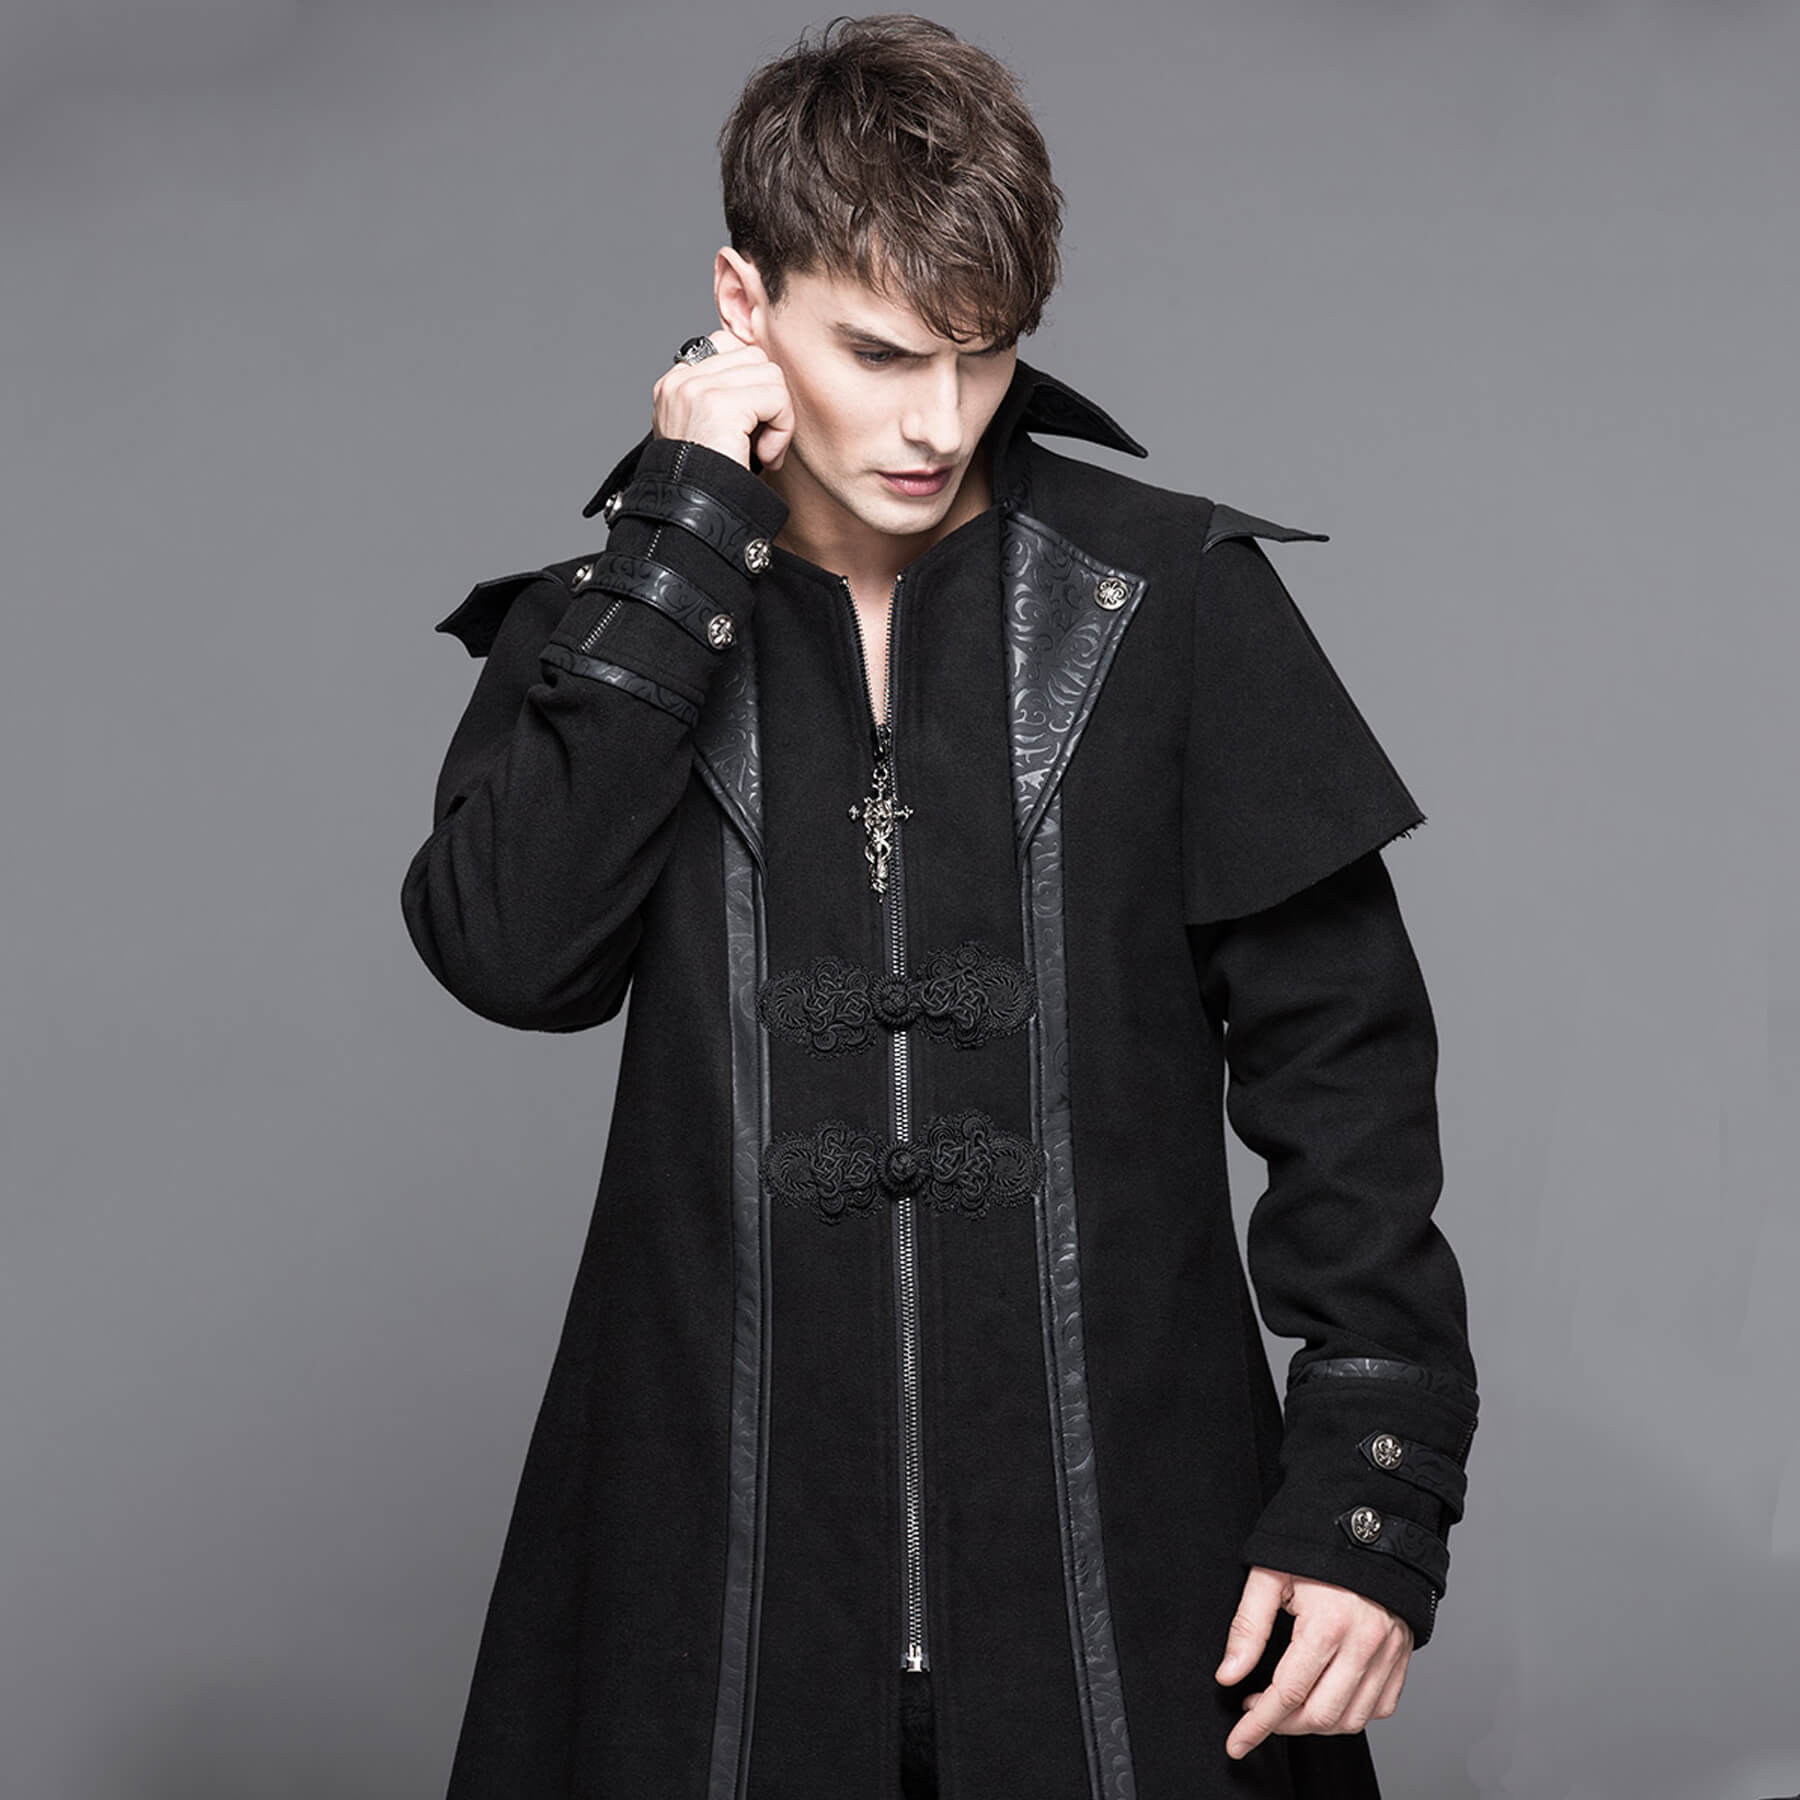 man-waist-up-posing-wearing-a-black-gothic-long-coat-in-grey-background_DDCJCT